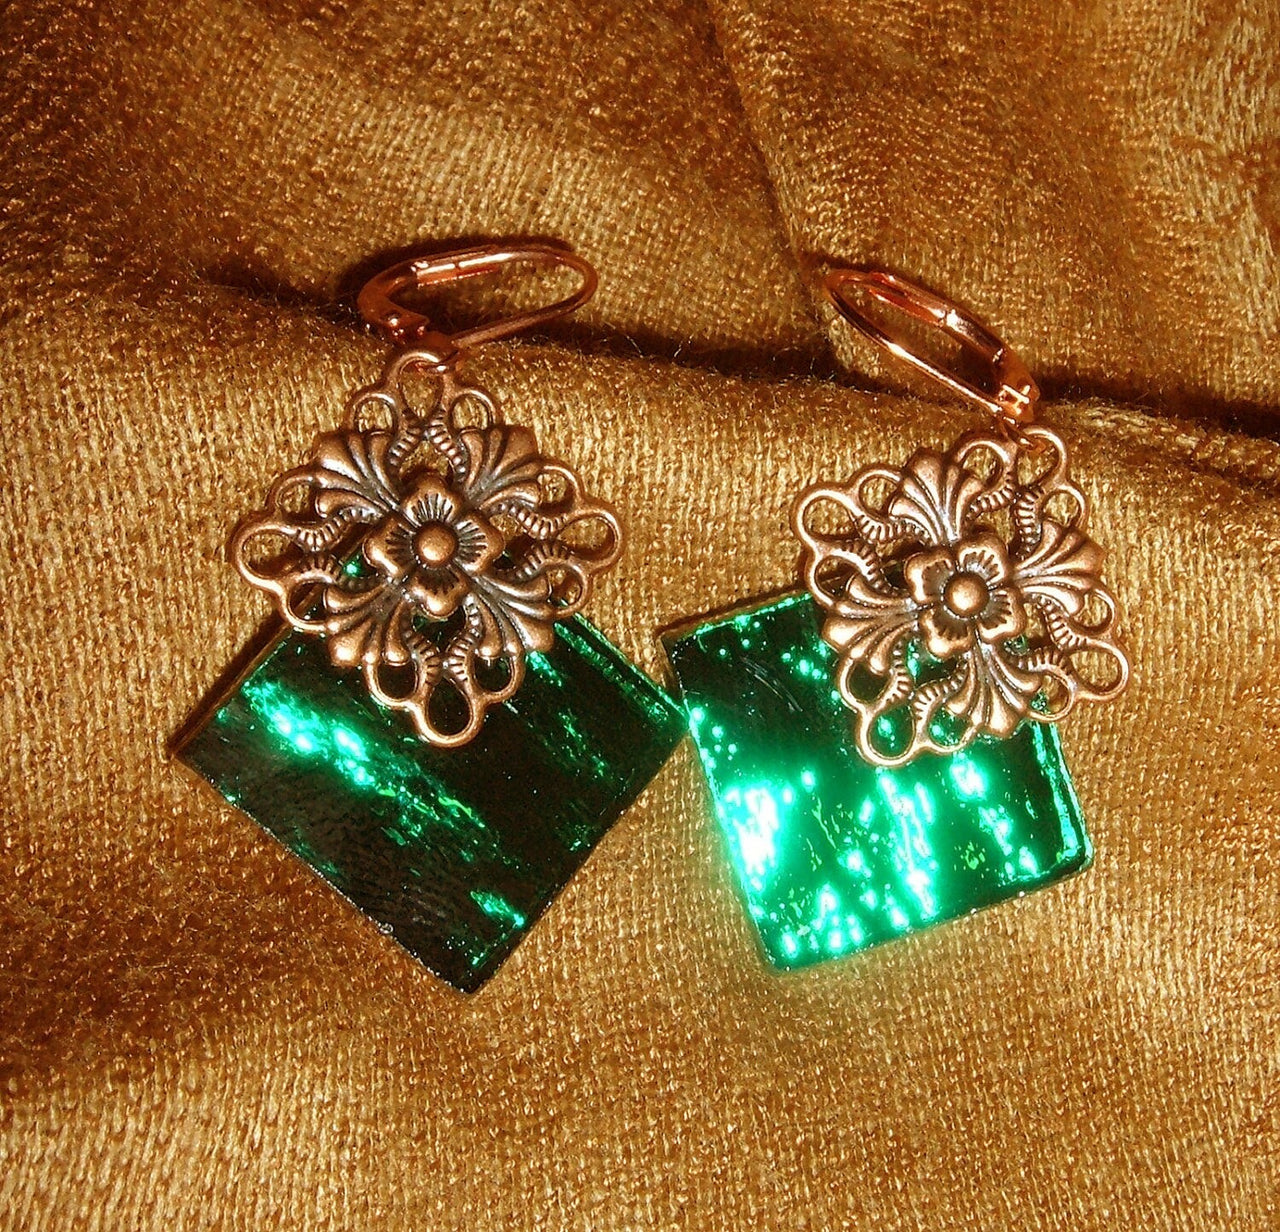 Emerald green mirror glass stained glass earrings